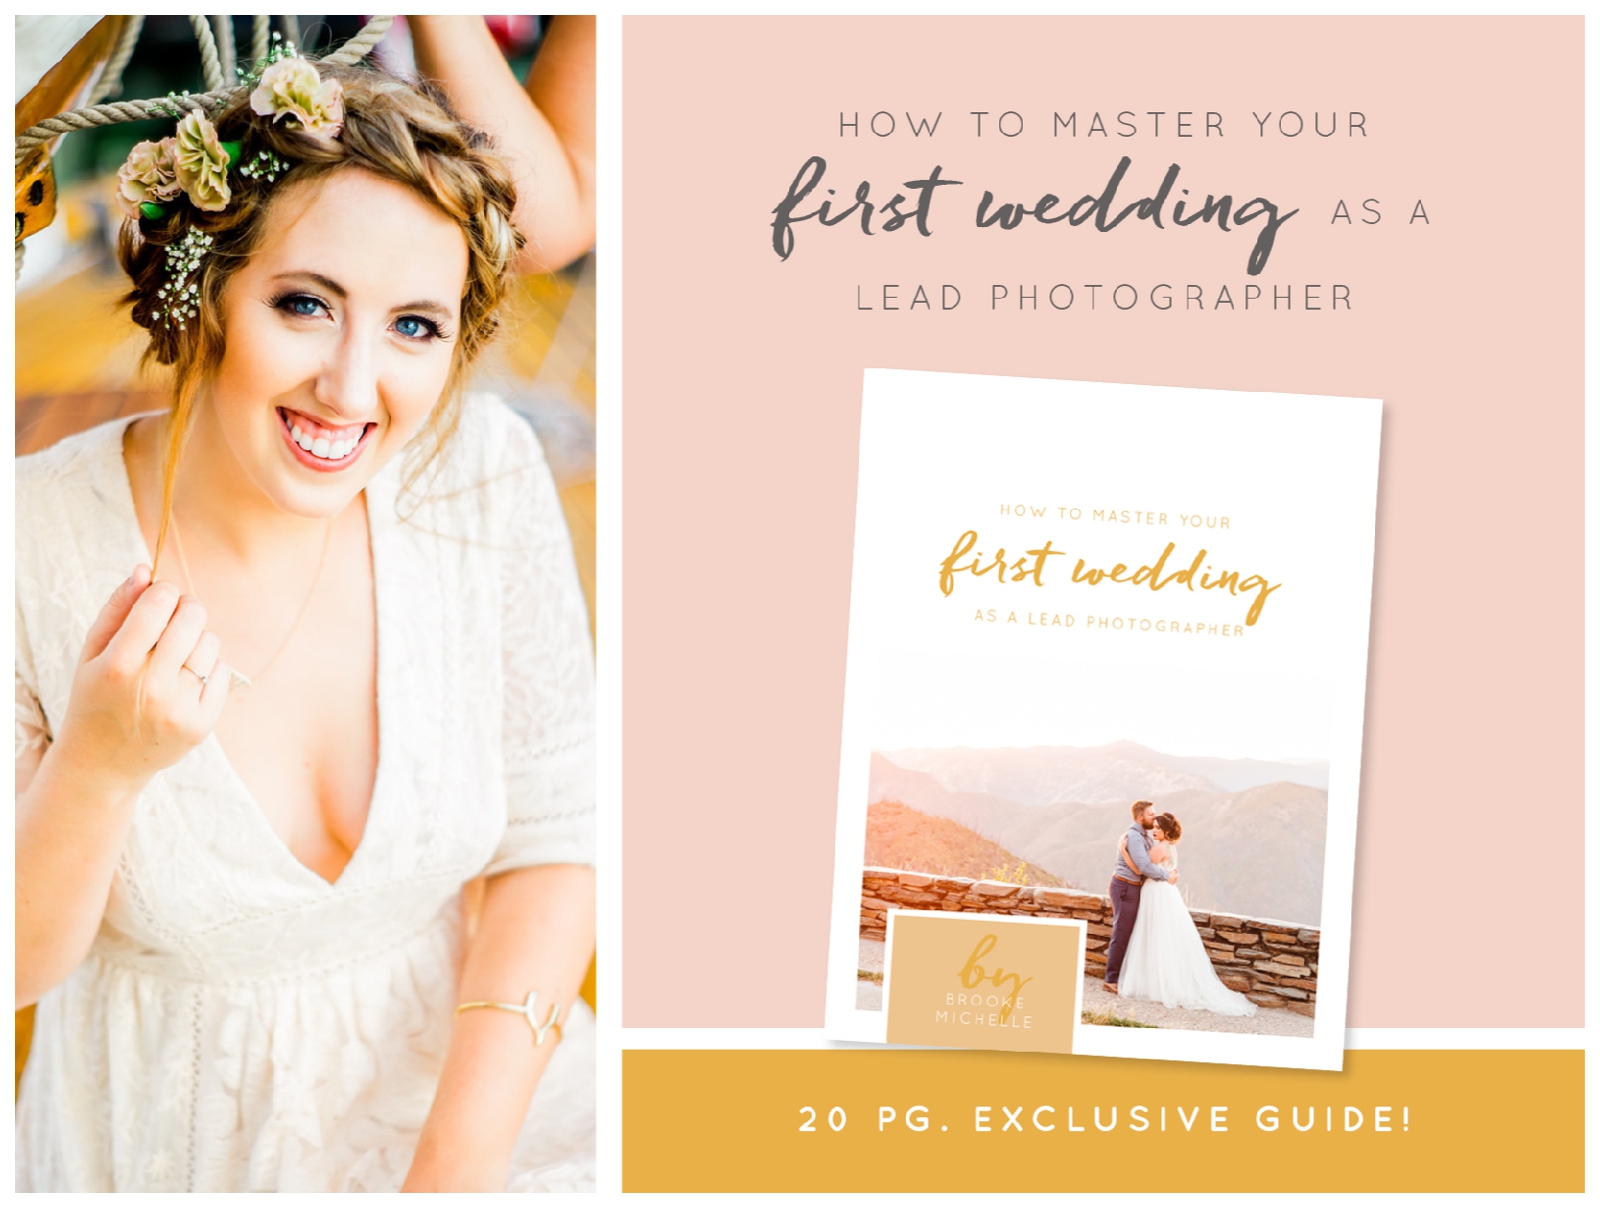 How to Master Your First Wedding as Lead Photographer - Free Online Education for Photographers - Brooke Michelle Photography